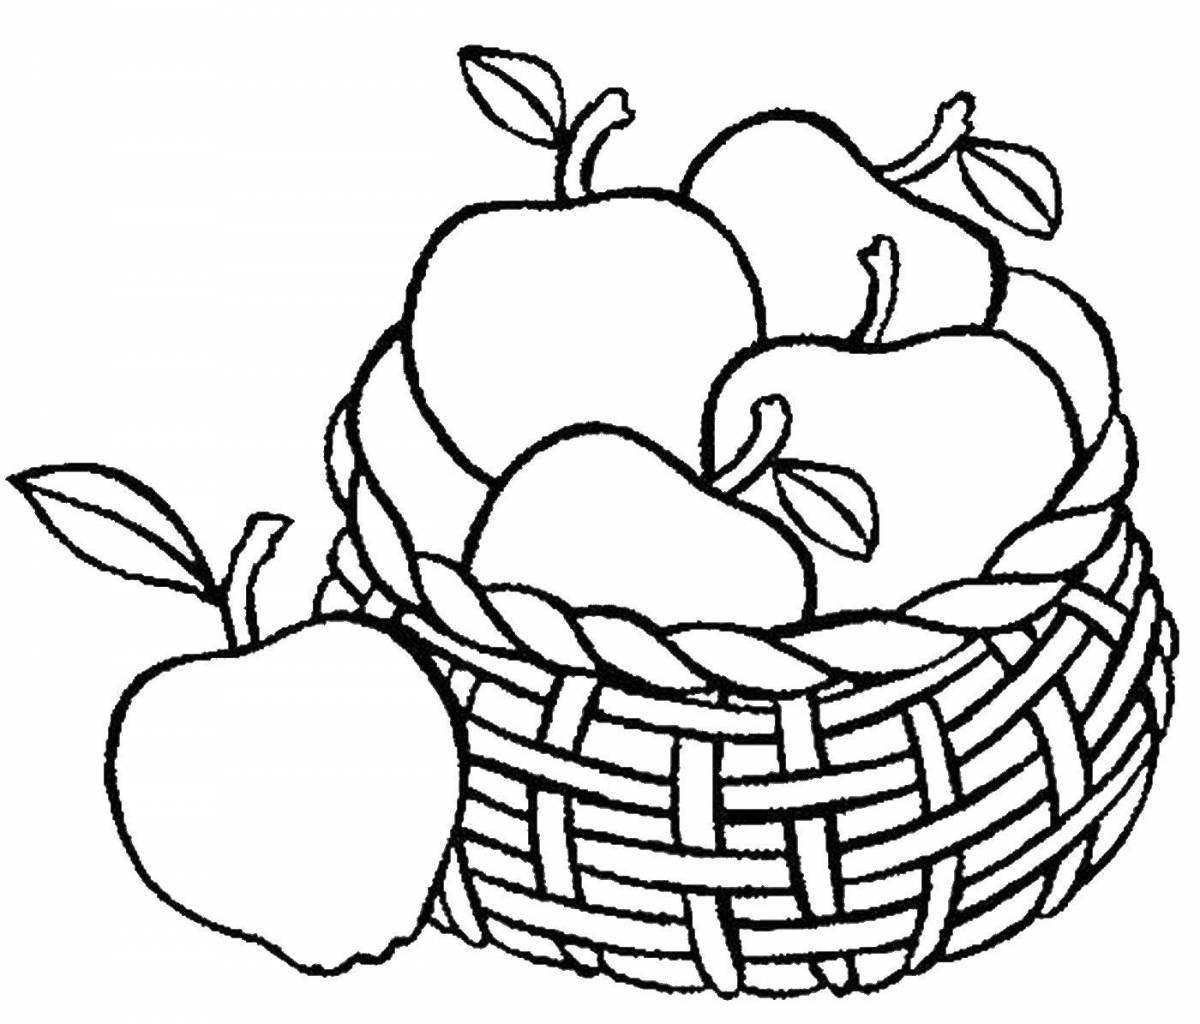 Playful still life coloring page for 6-7 year olds